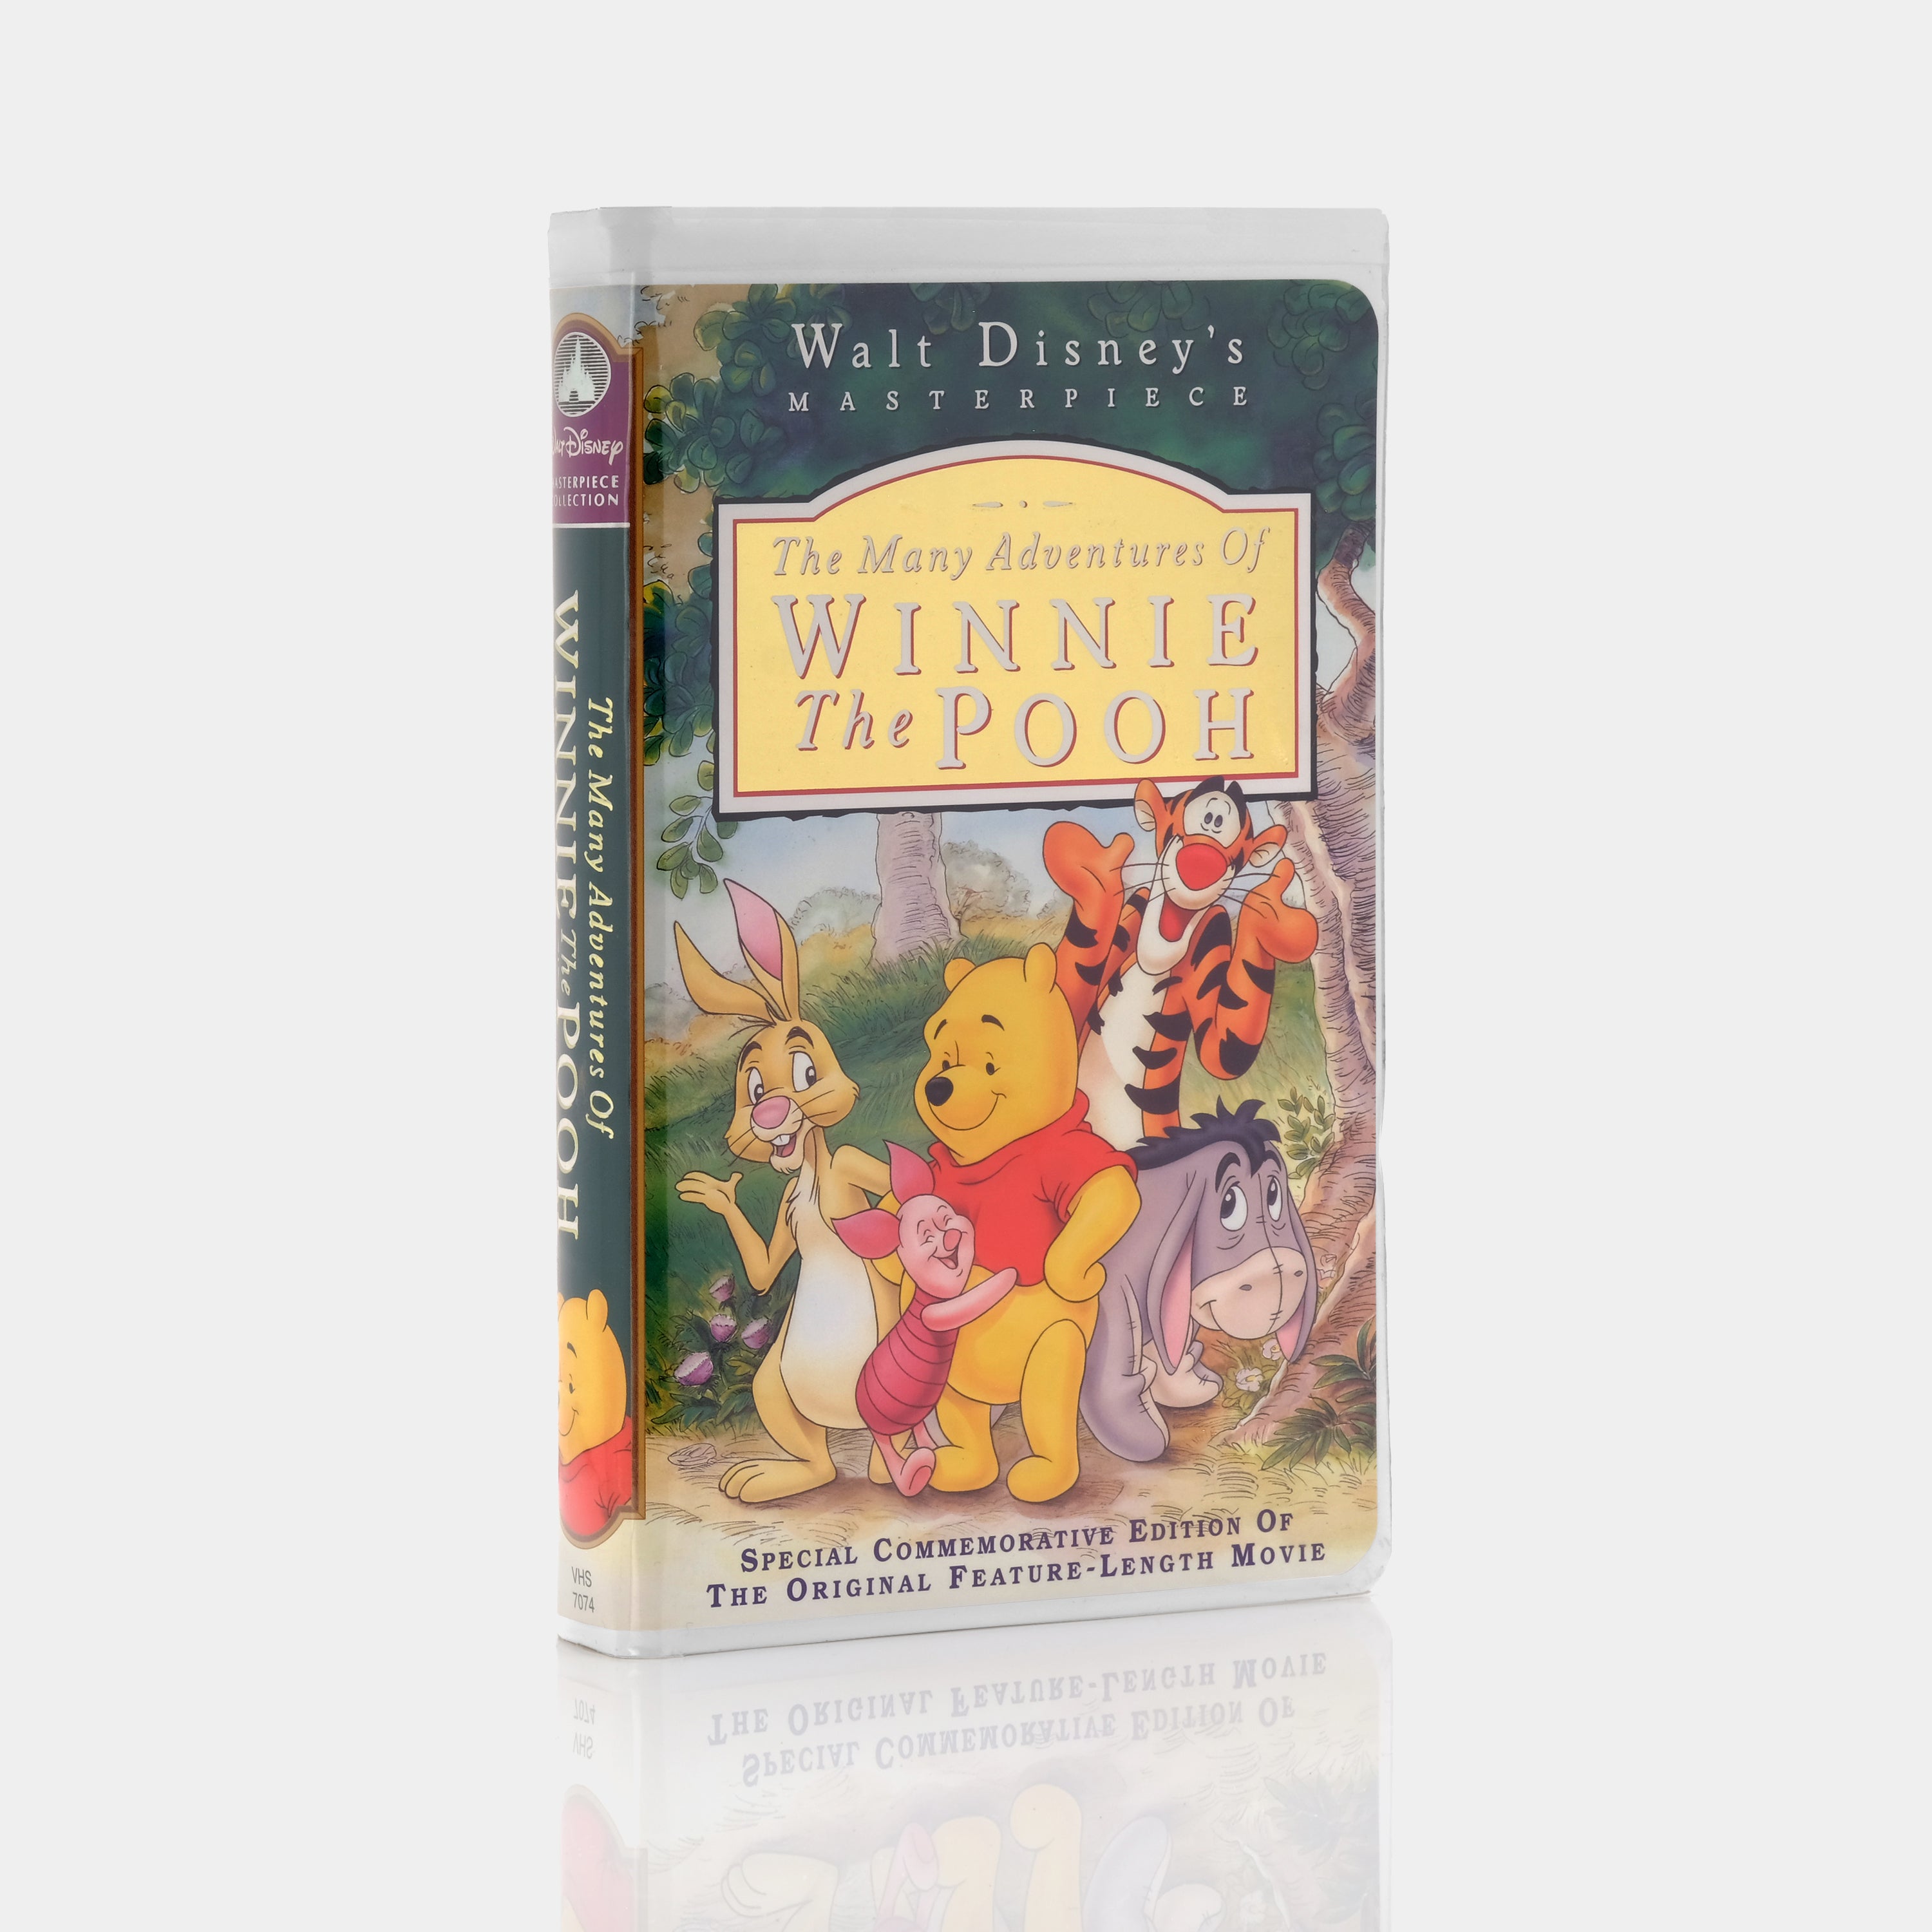 Disney's The Many Adventures Of Winnie The Pooh VHS Tape